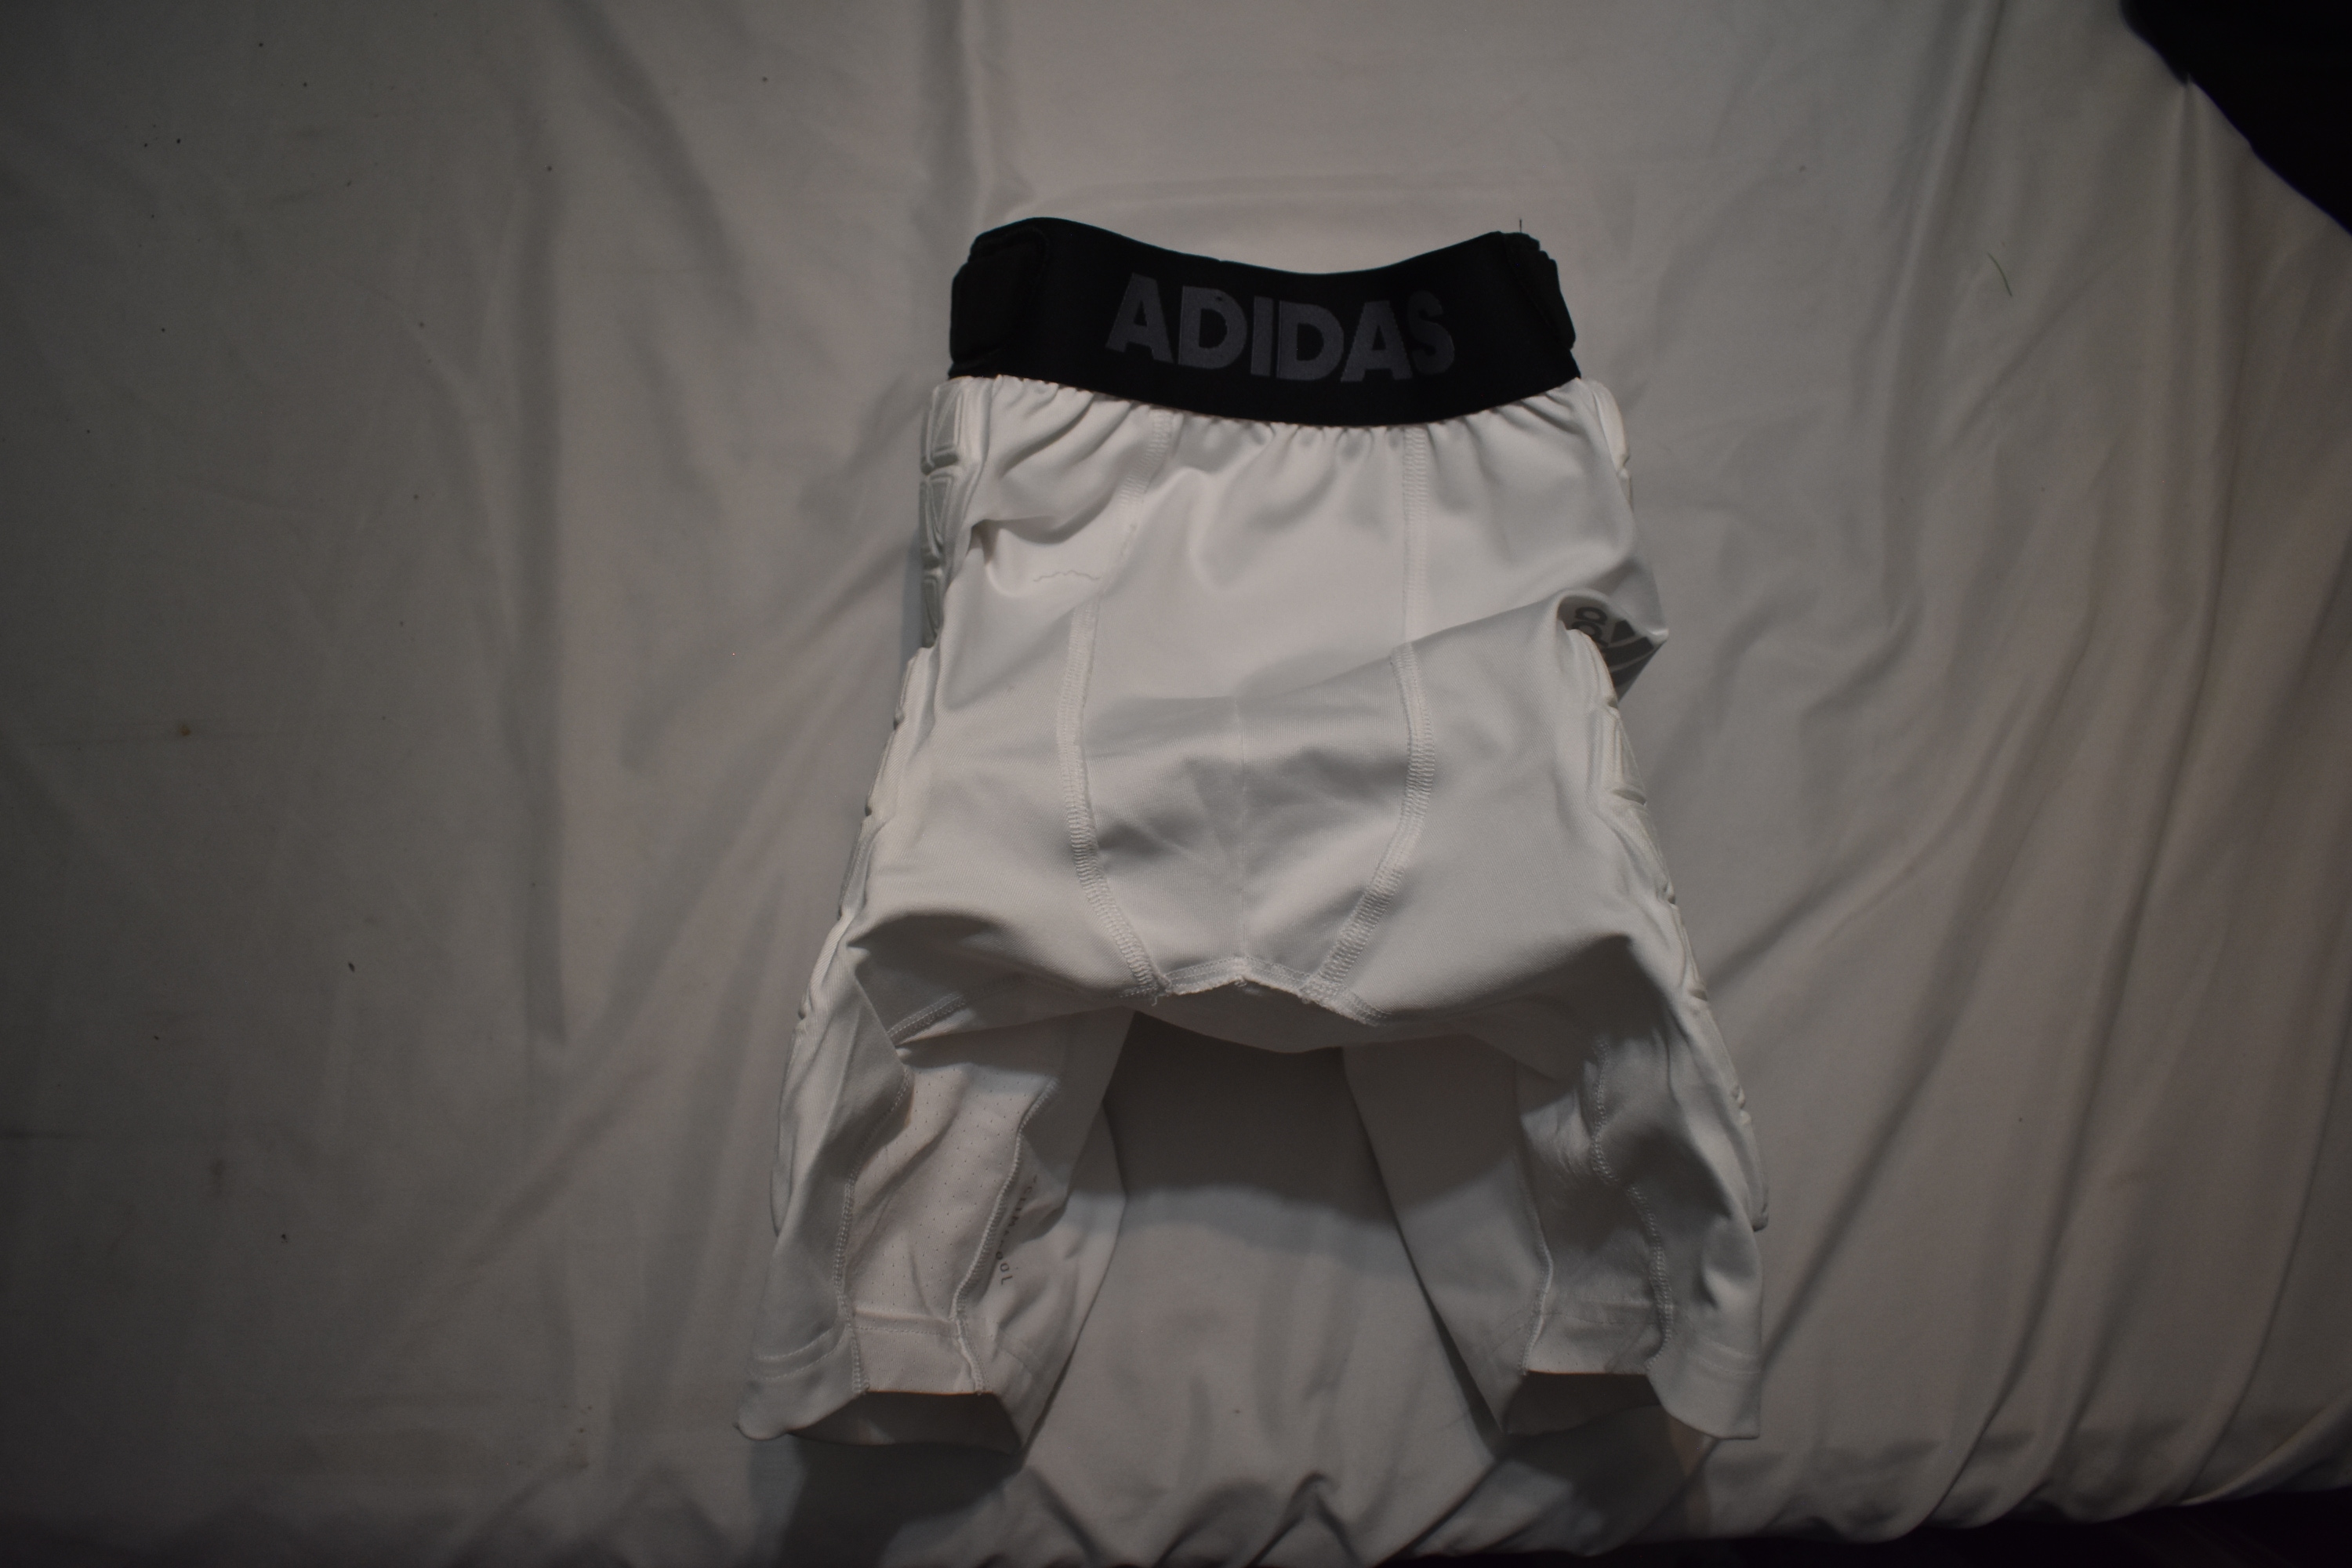 Adidas ClimaCool Standard 19 Protective Compression Shorts, White, Adult Medium